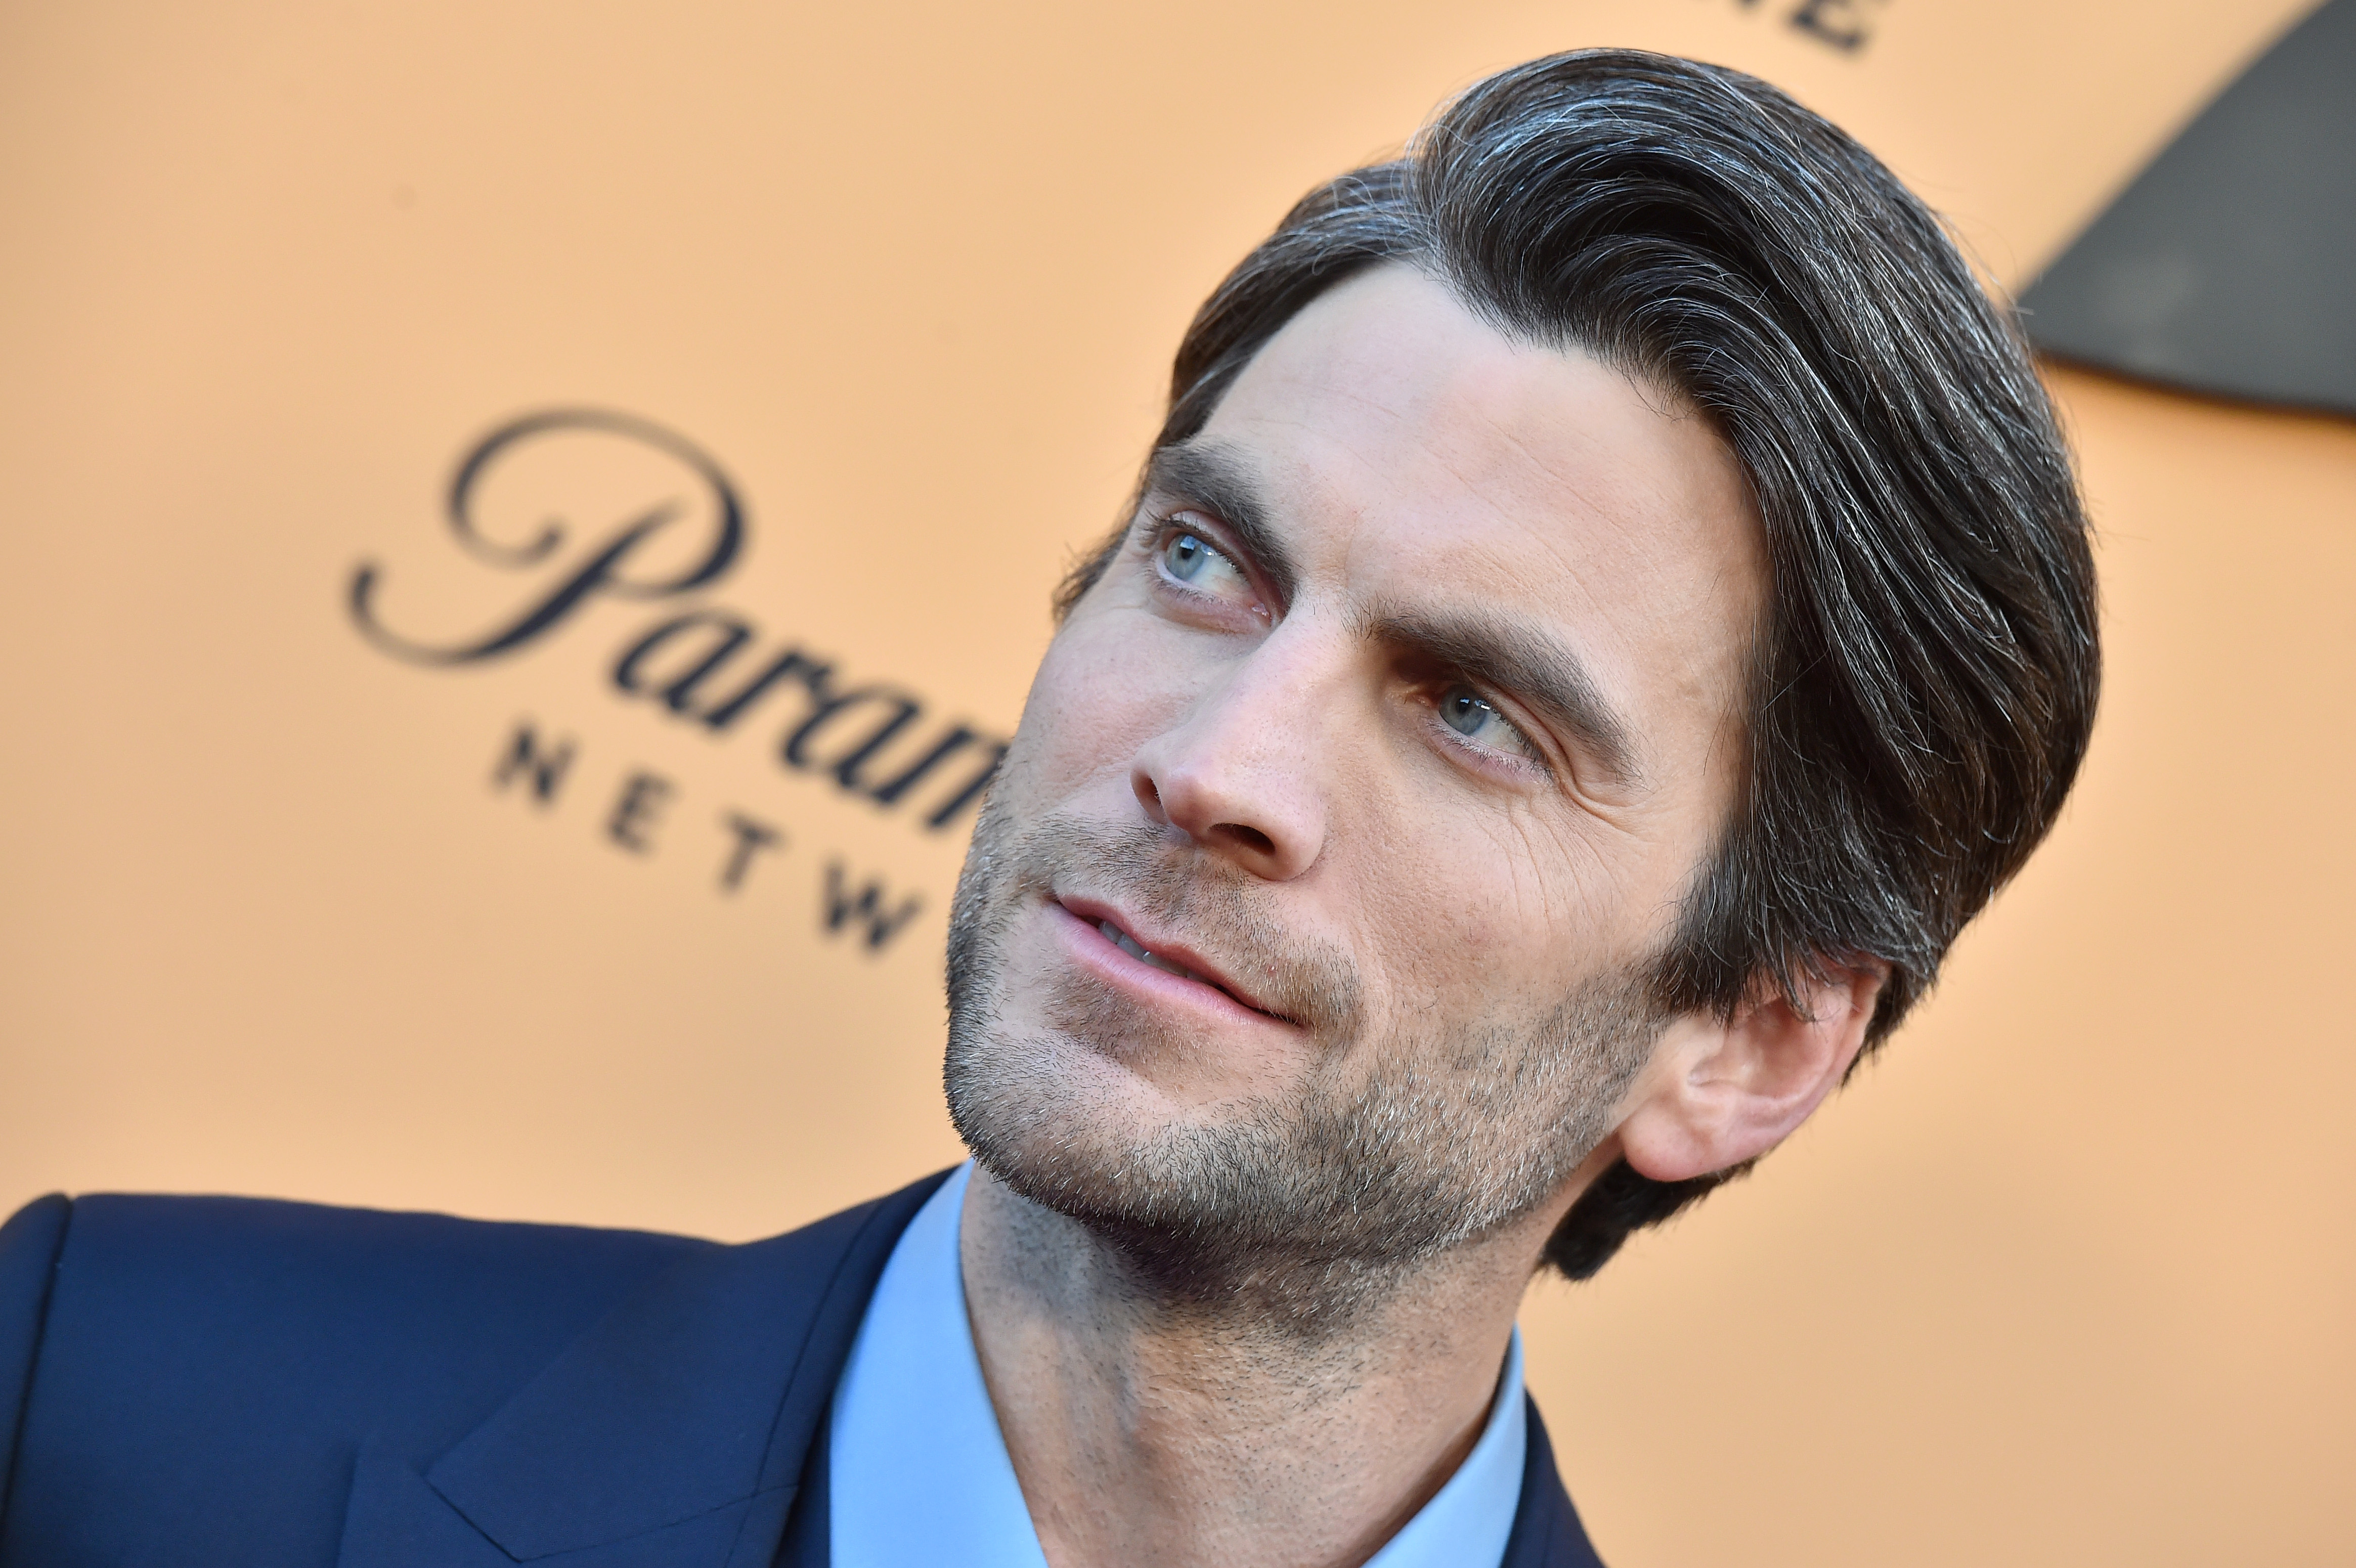 Yellowstone star Wes Bentley attends the premiere party Season 2 at Lombardi House on May 30, 2019